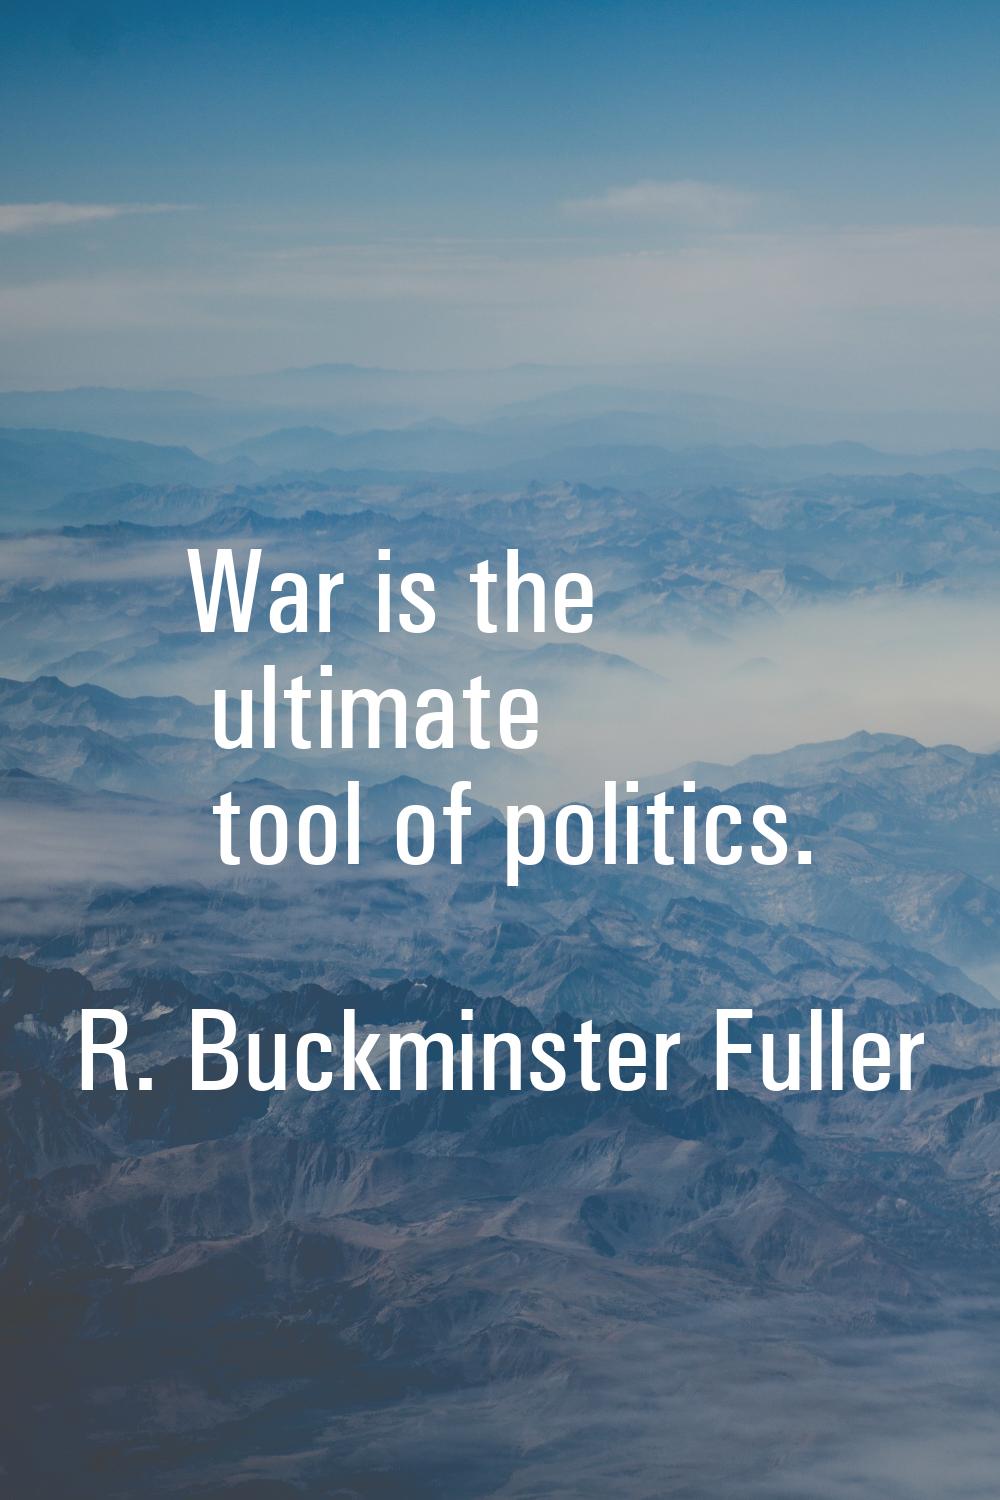 War is the ultimate tool of politics.